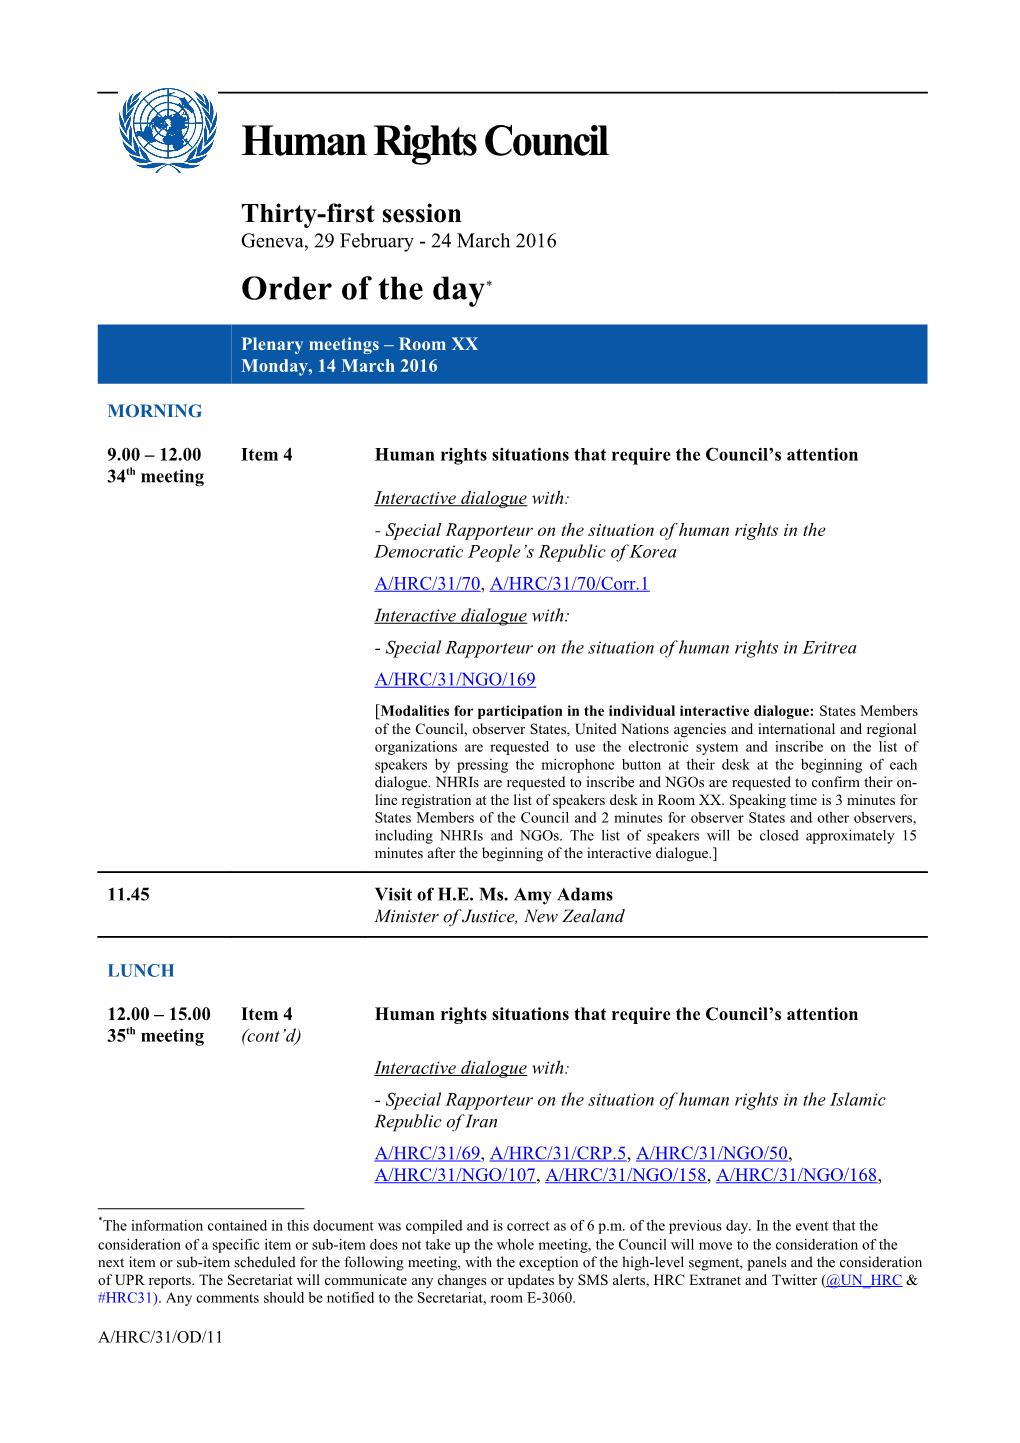 Order of the Day, Monday 14 March 2016